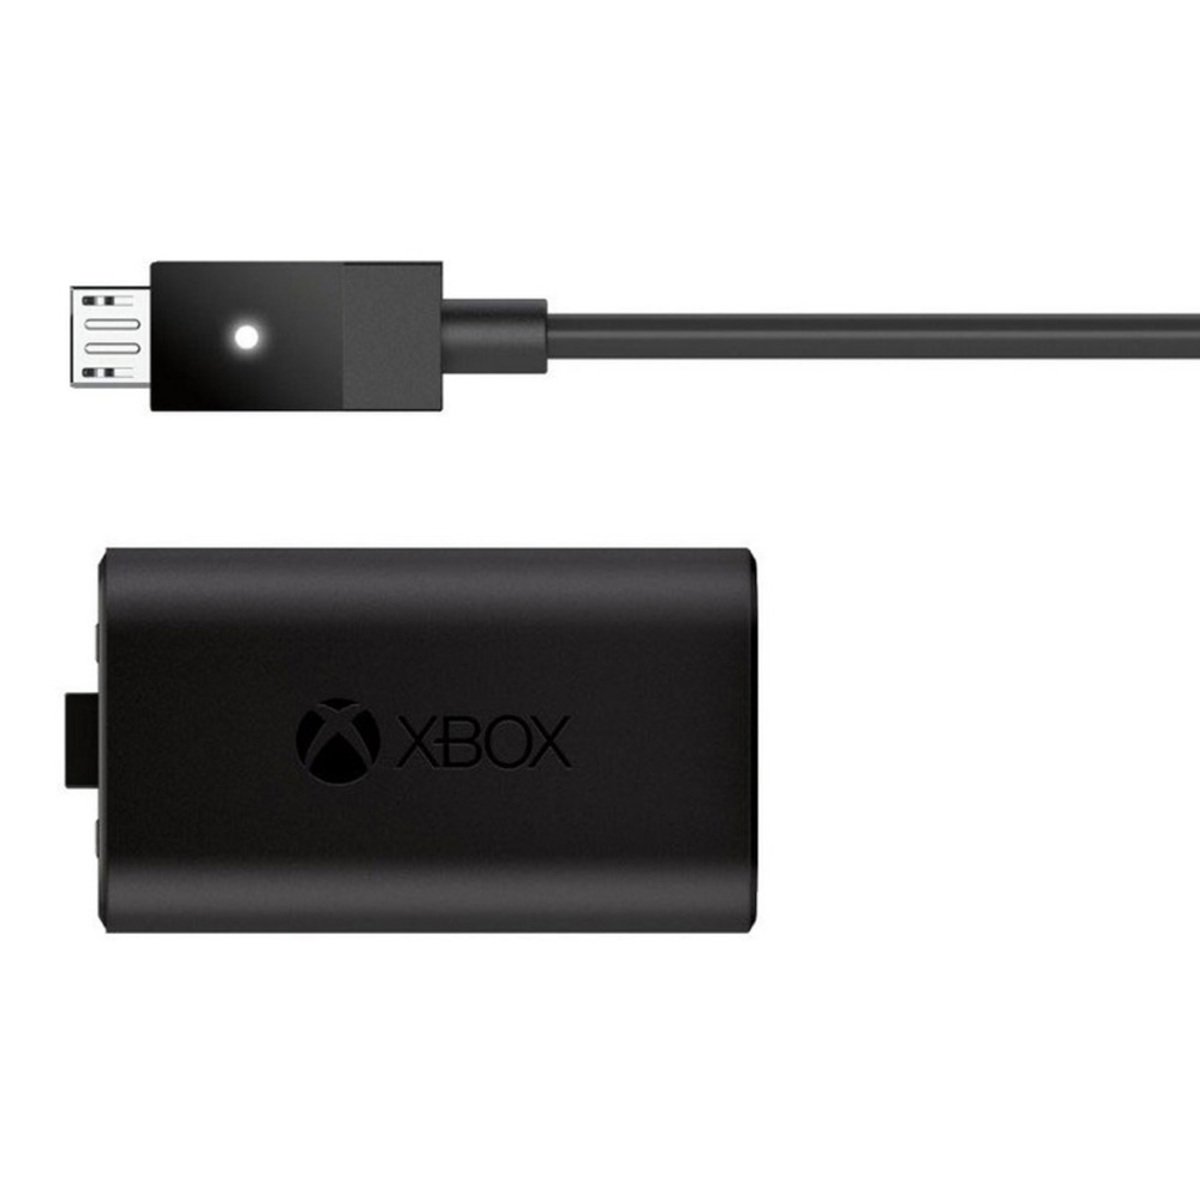 Xbox One Play & Charge Kit S3V-00008